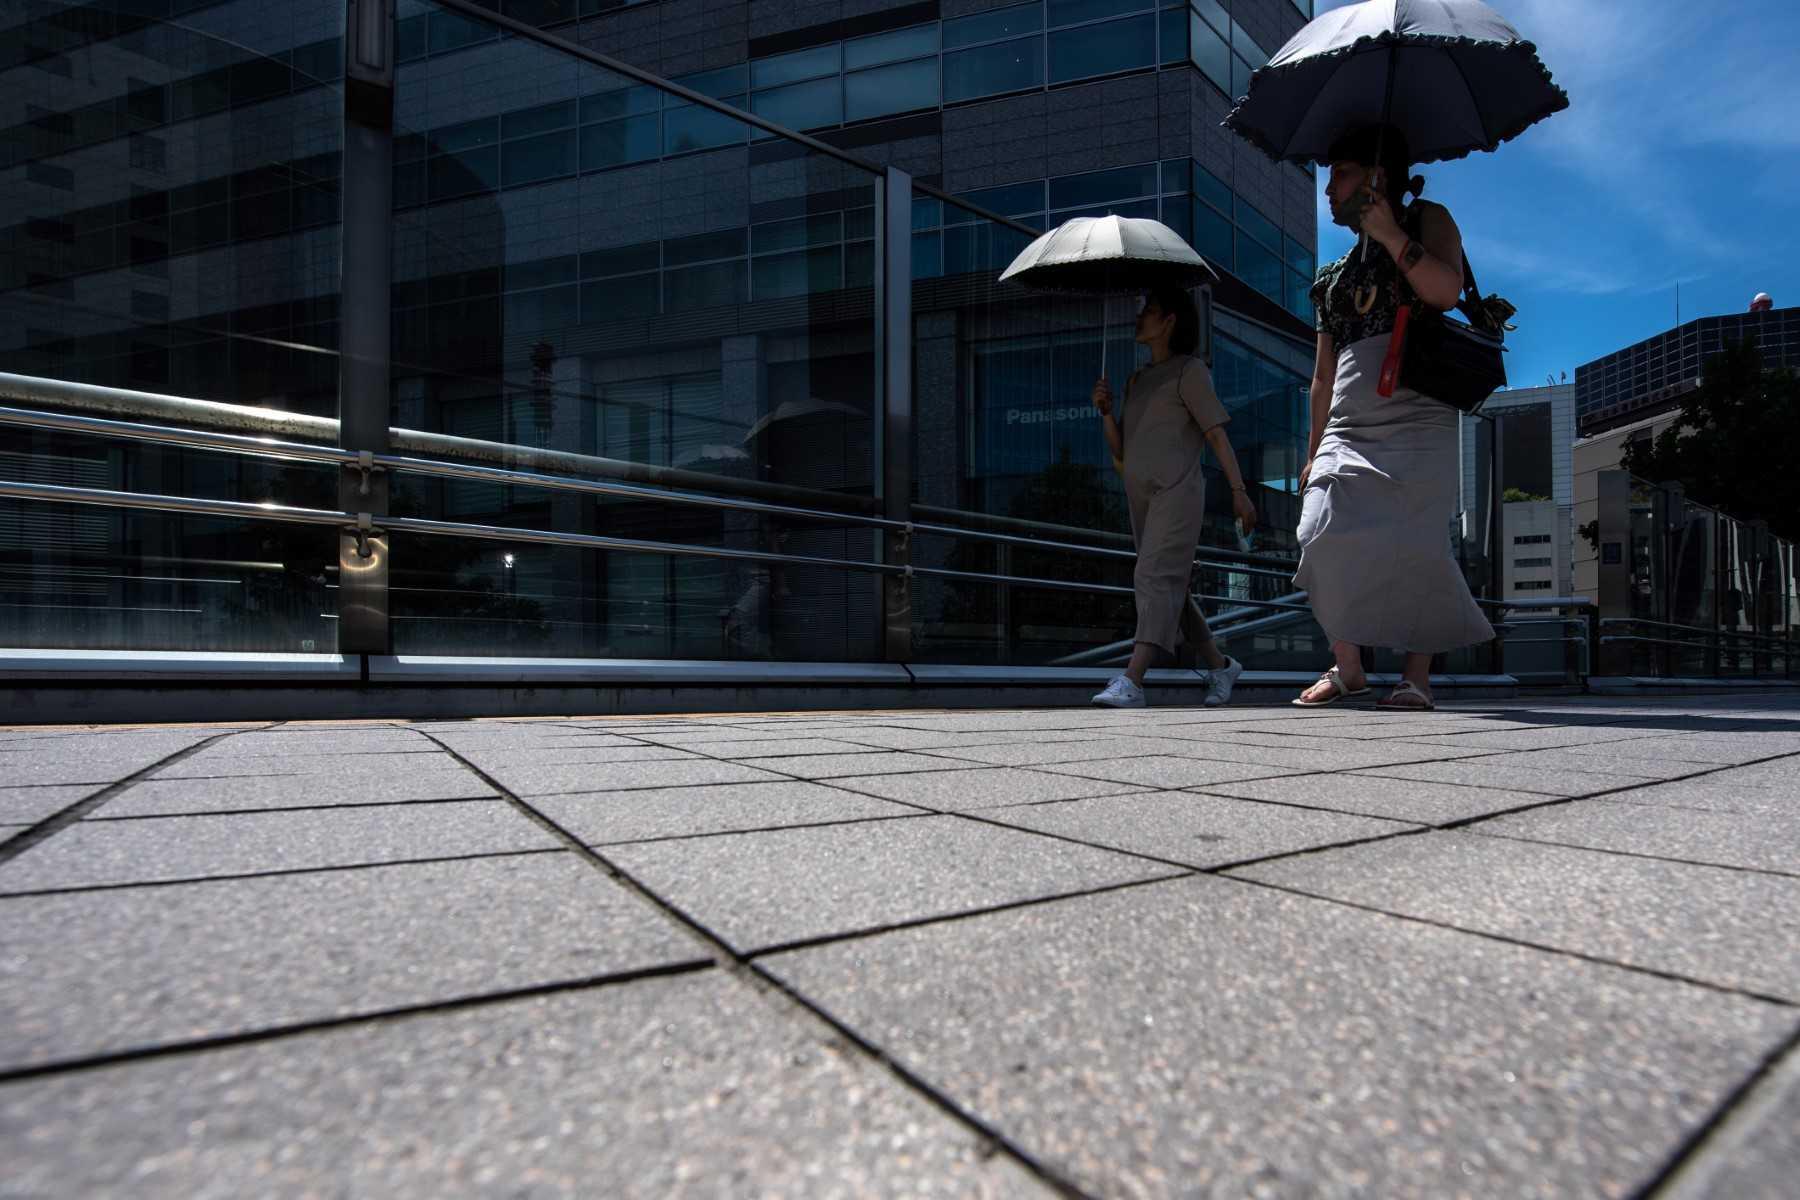 Pedestrians carrying umbrellas to shade themselves from the heat walk on a footbridge in a business district Tokyo on June 29. Photo: AFP